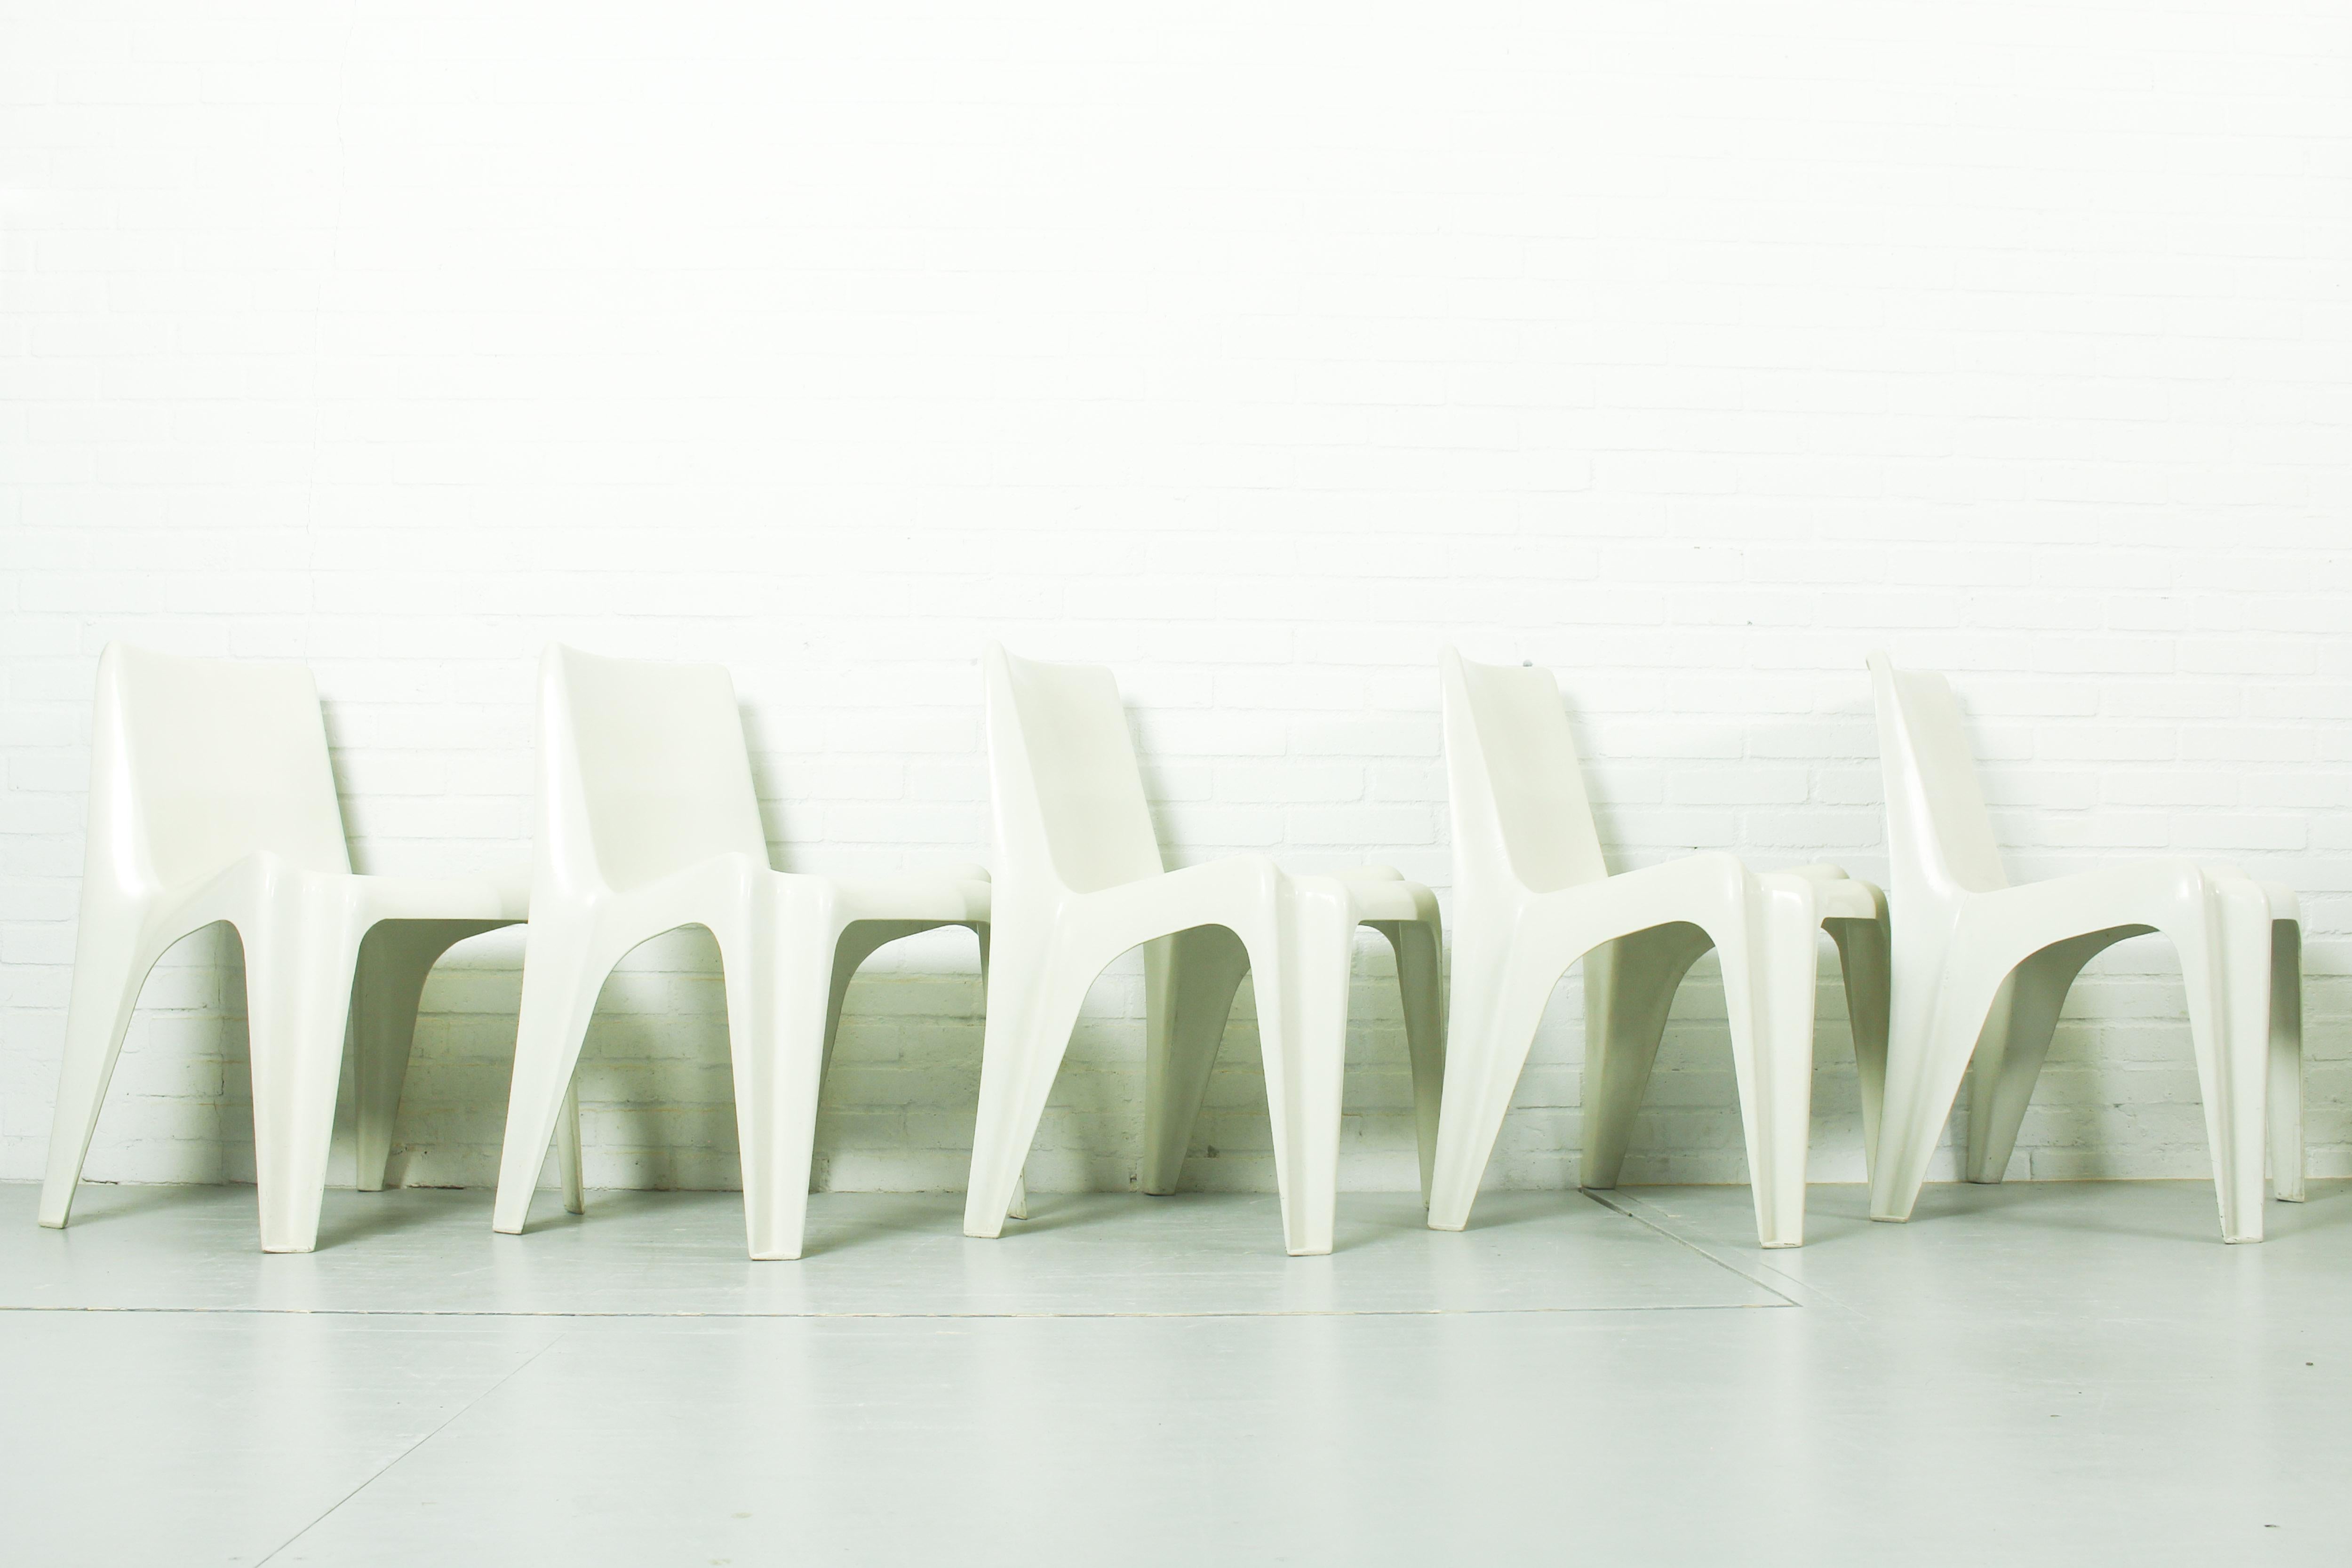 Set of 5 chairs model no BA 1171 designed by Helmut Bätzner for Bofinger, Germany 1960s. This model was launched at the 1966 Cologne Furniture Fair, as the first single-piece plastic chair which could be mass produced. The chairs are suitable for